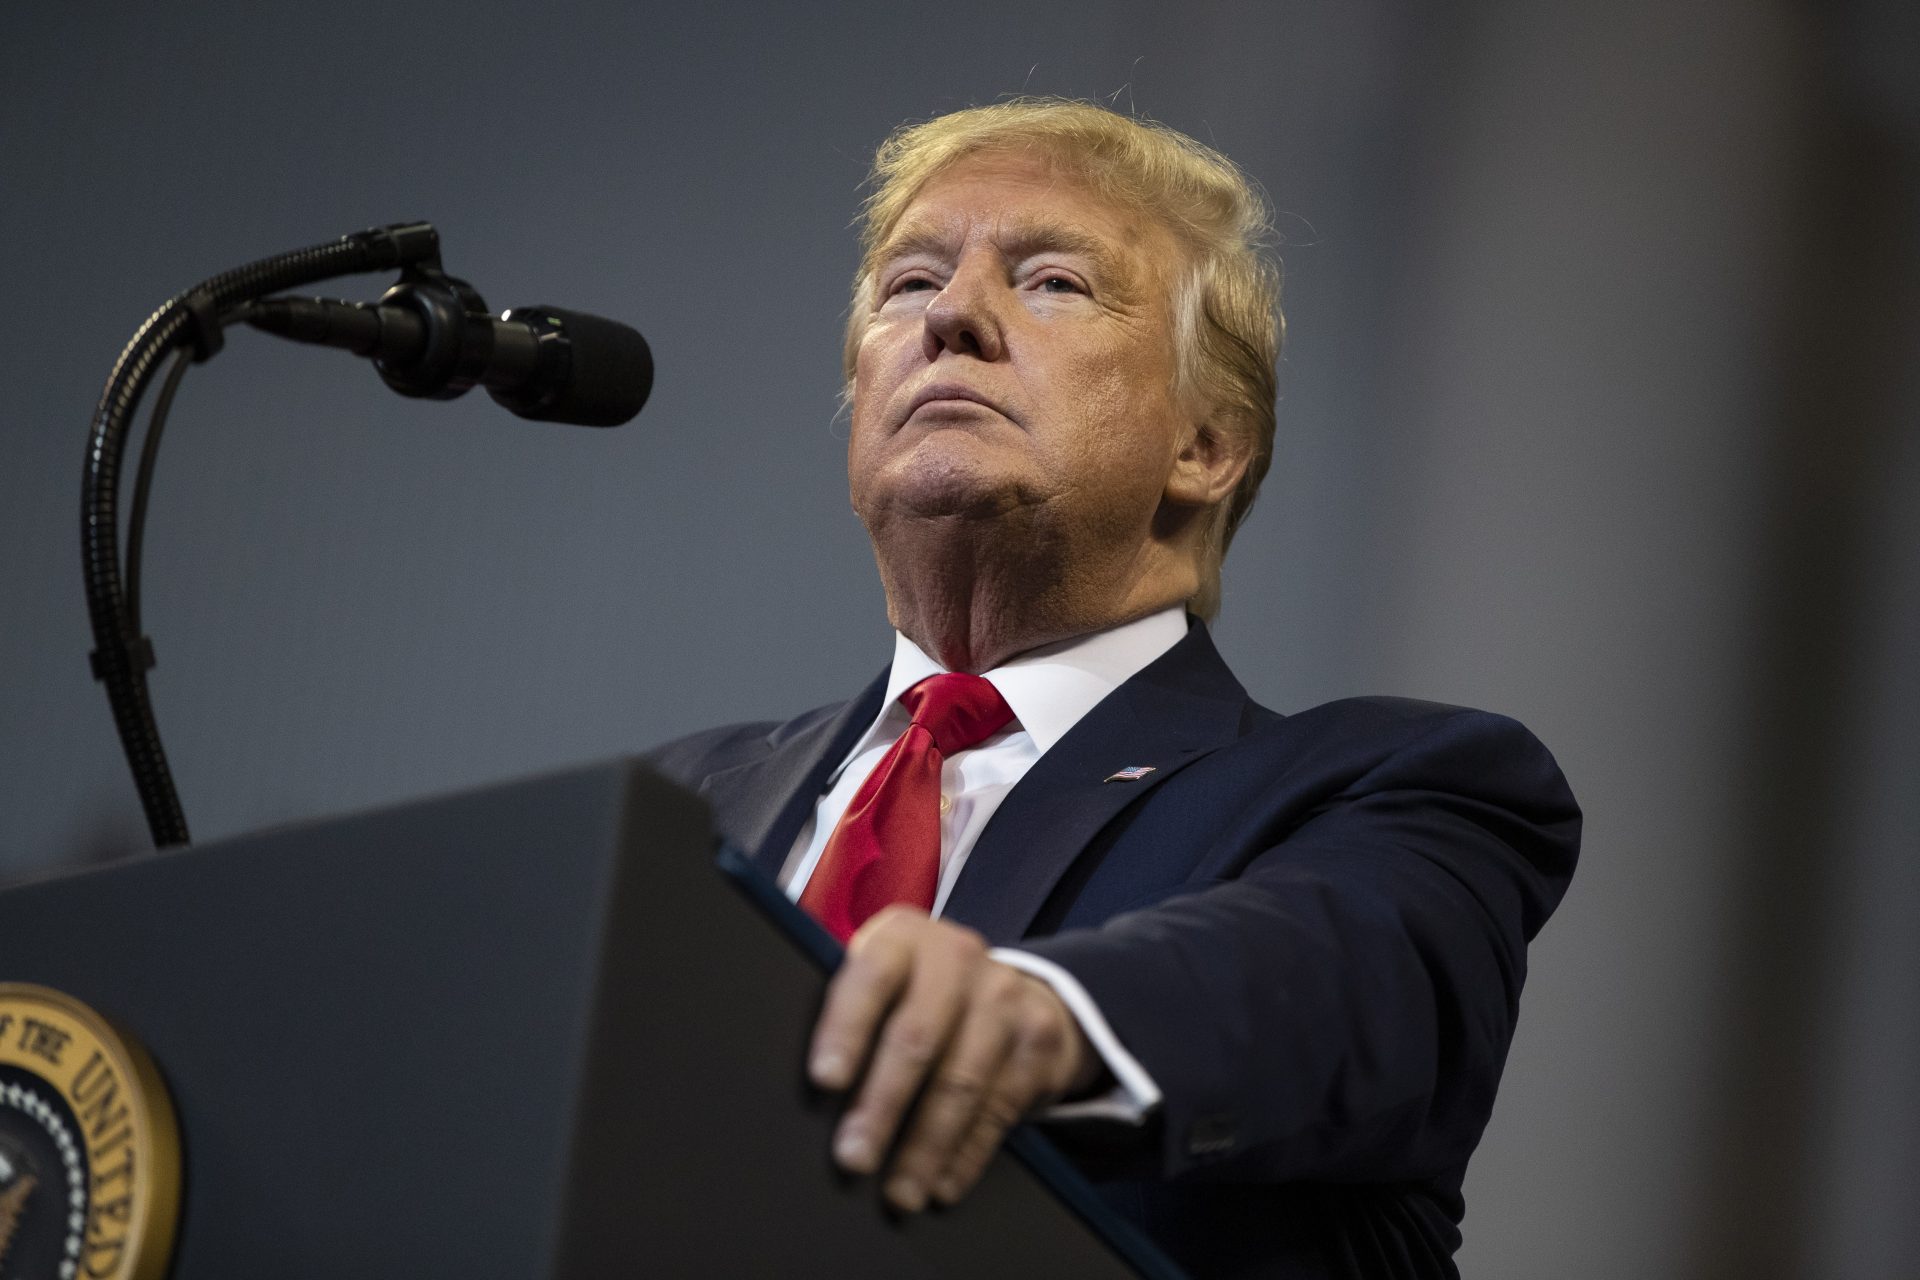 President Donald Trump speaks during a campaign rally at the CenturyLink Center, Thursday, Nov. 14, 2019, in Bossier City, La.